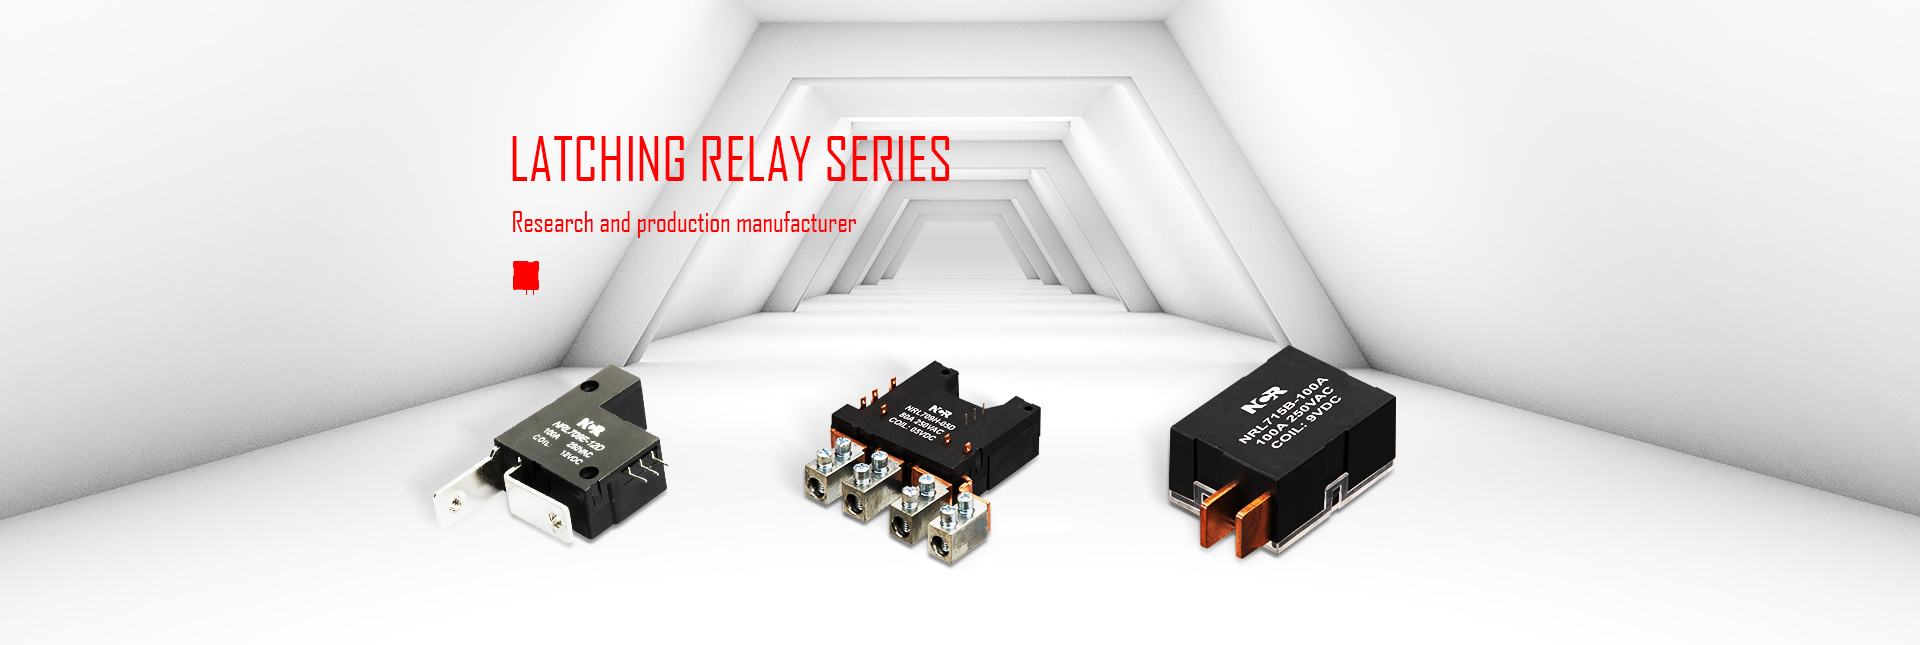 Low Power Latching Relay